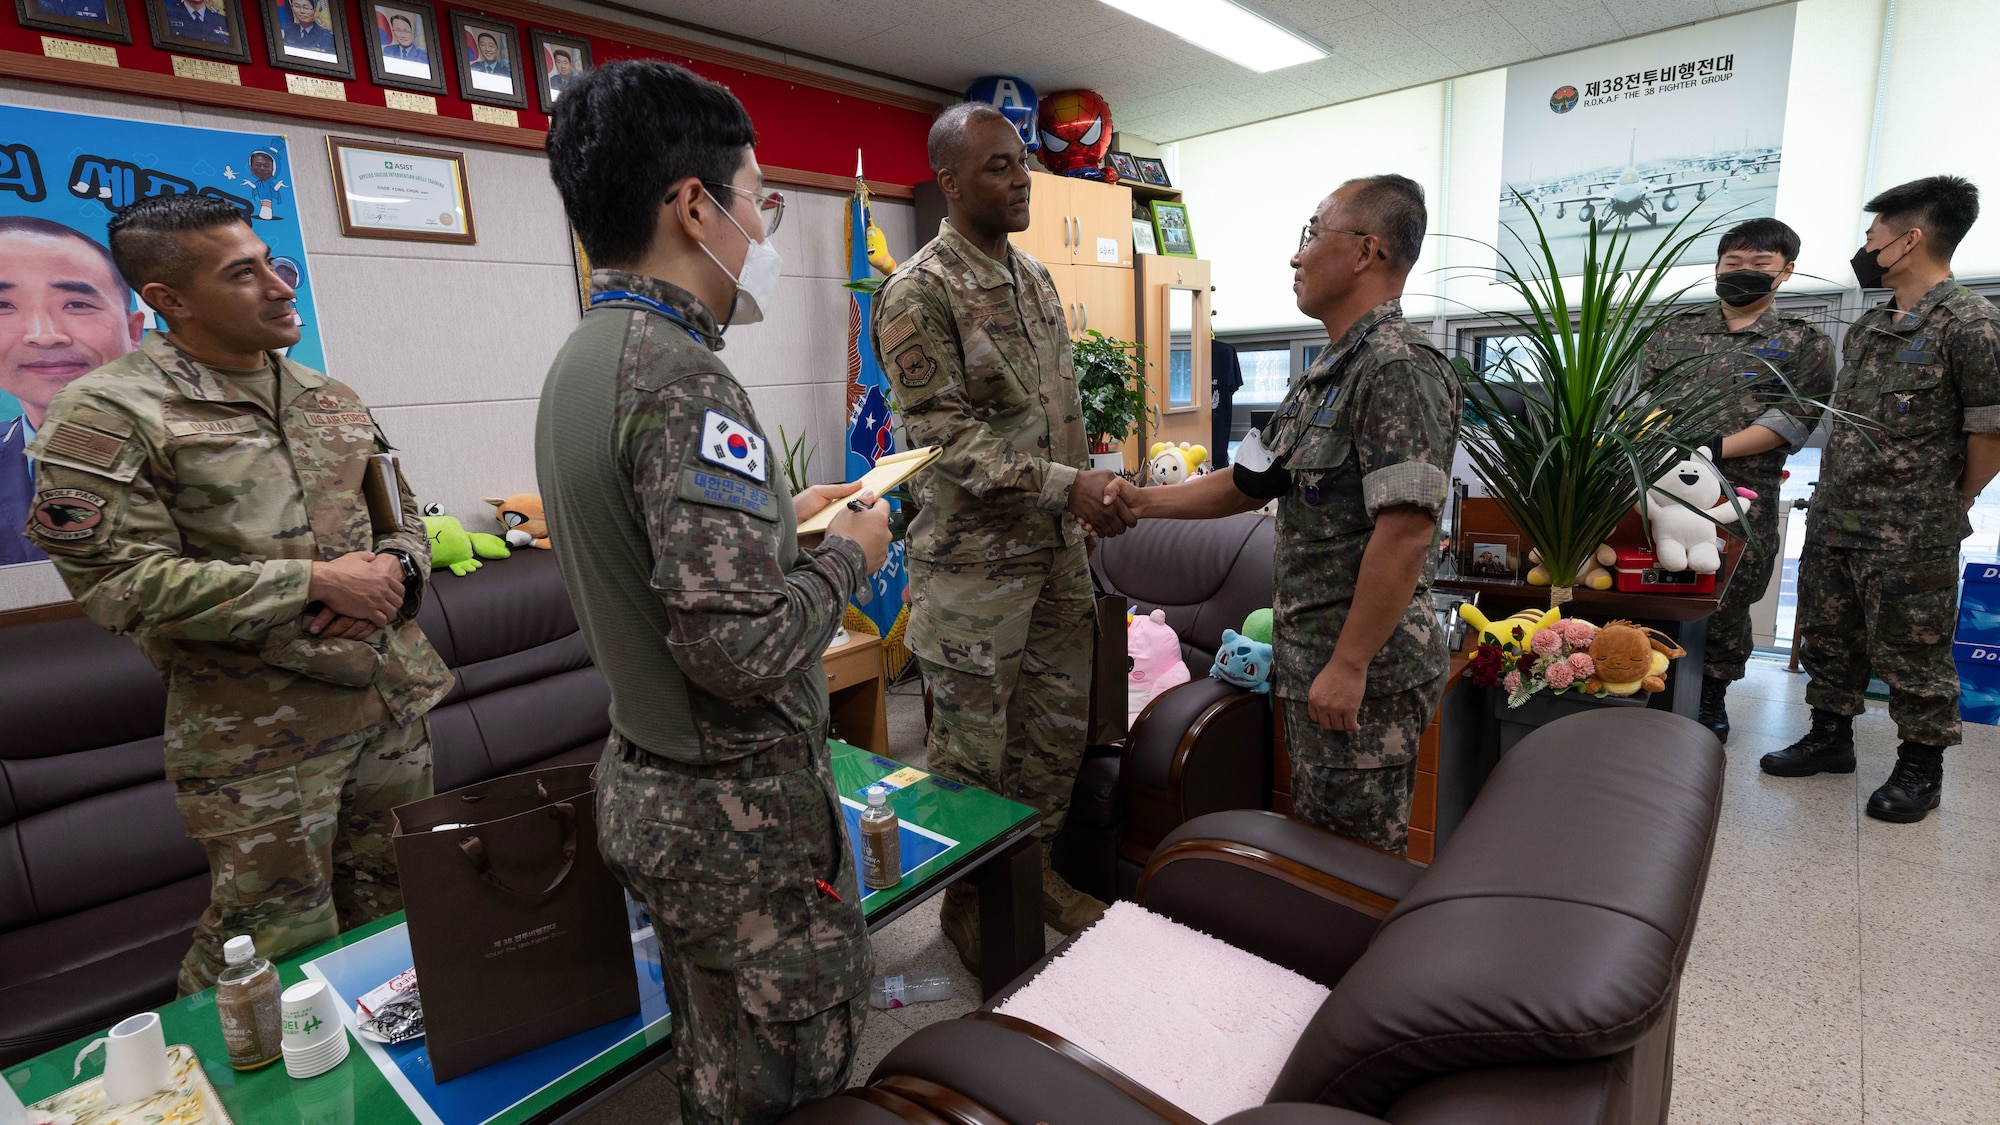 Military members sit together in a room, two are shaking hands.